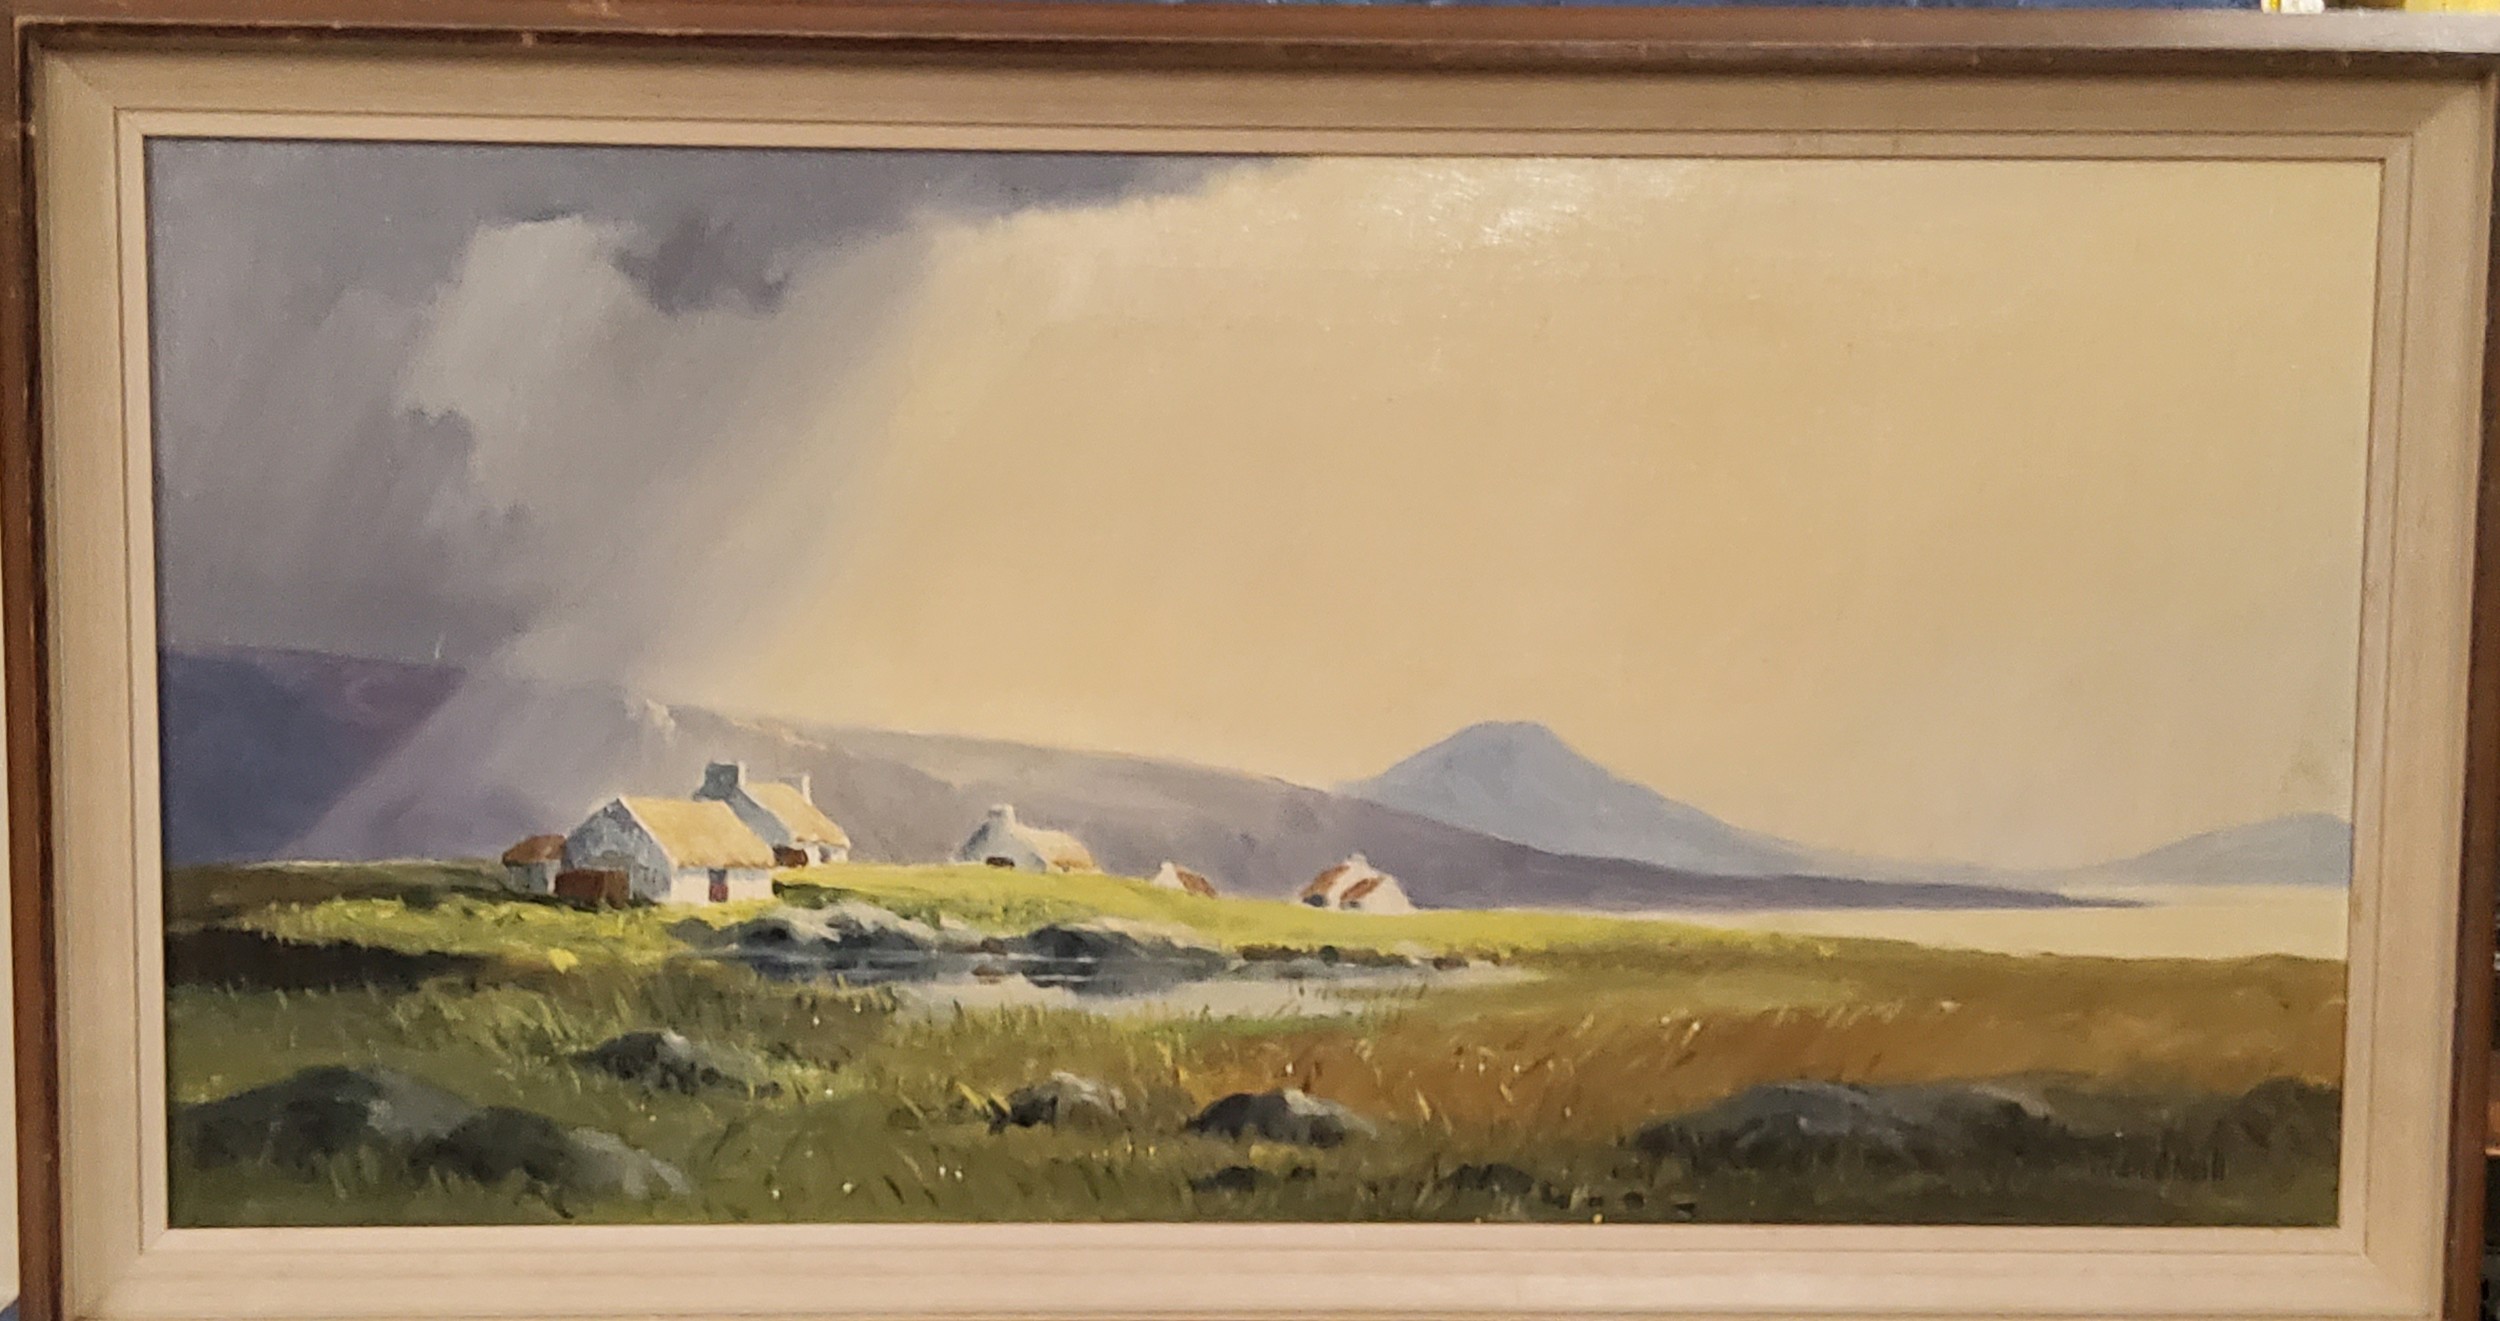 Stanley O'Neill, 20th century, Donegal Ireland, signed, oil on canvas, 49cm x 80cm